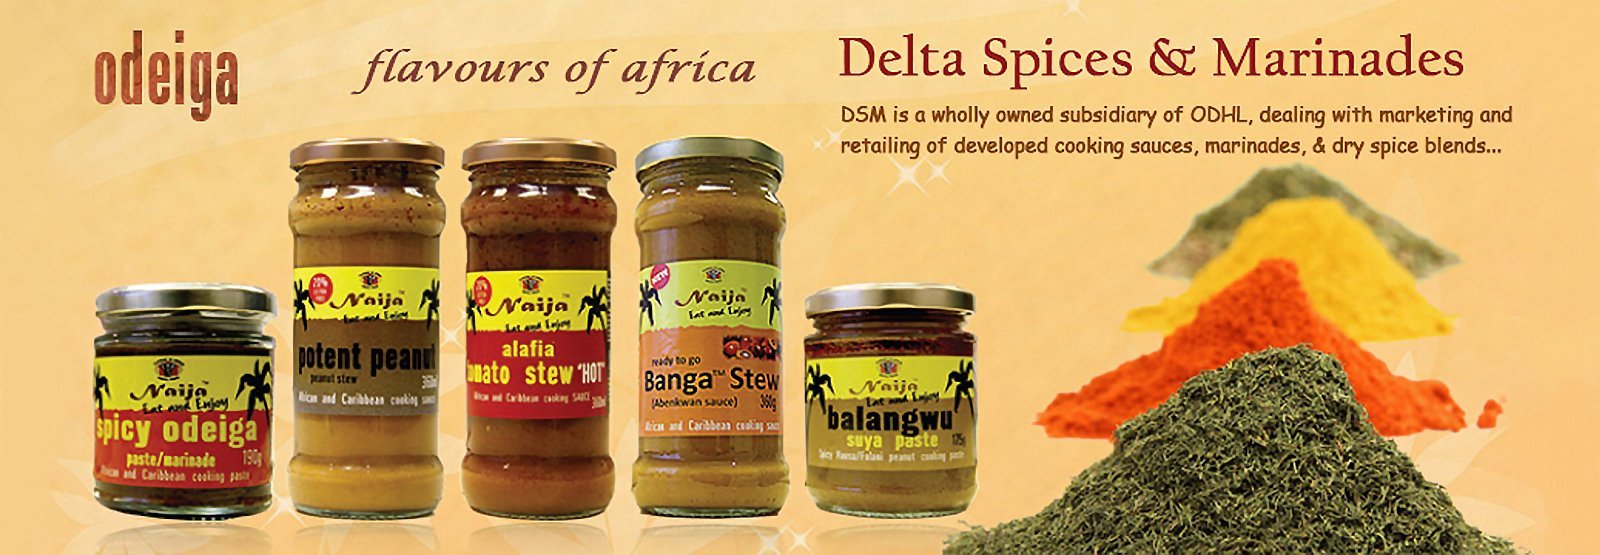 delta spices flavour of africa